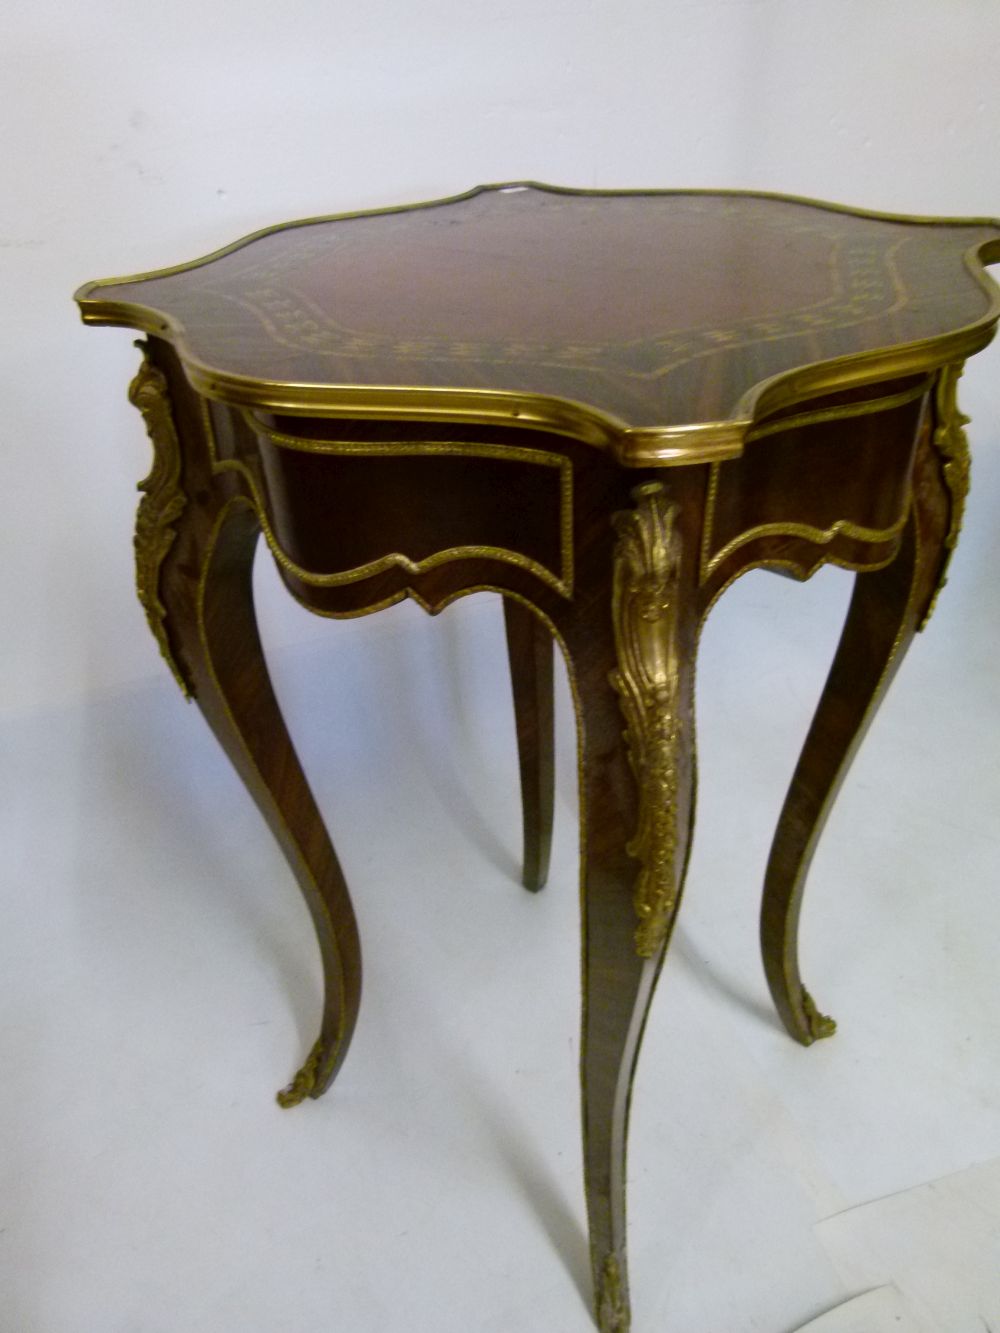 20th Century kingwood, marquetry and gilt metal-mounted occasional table or stand, of serpentine - Image 6 of 6